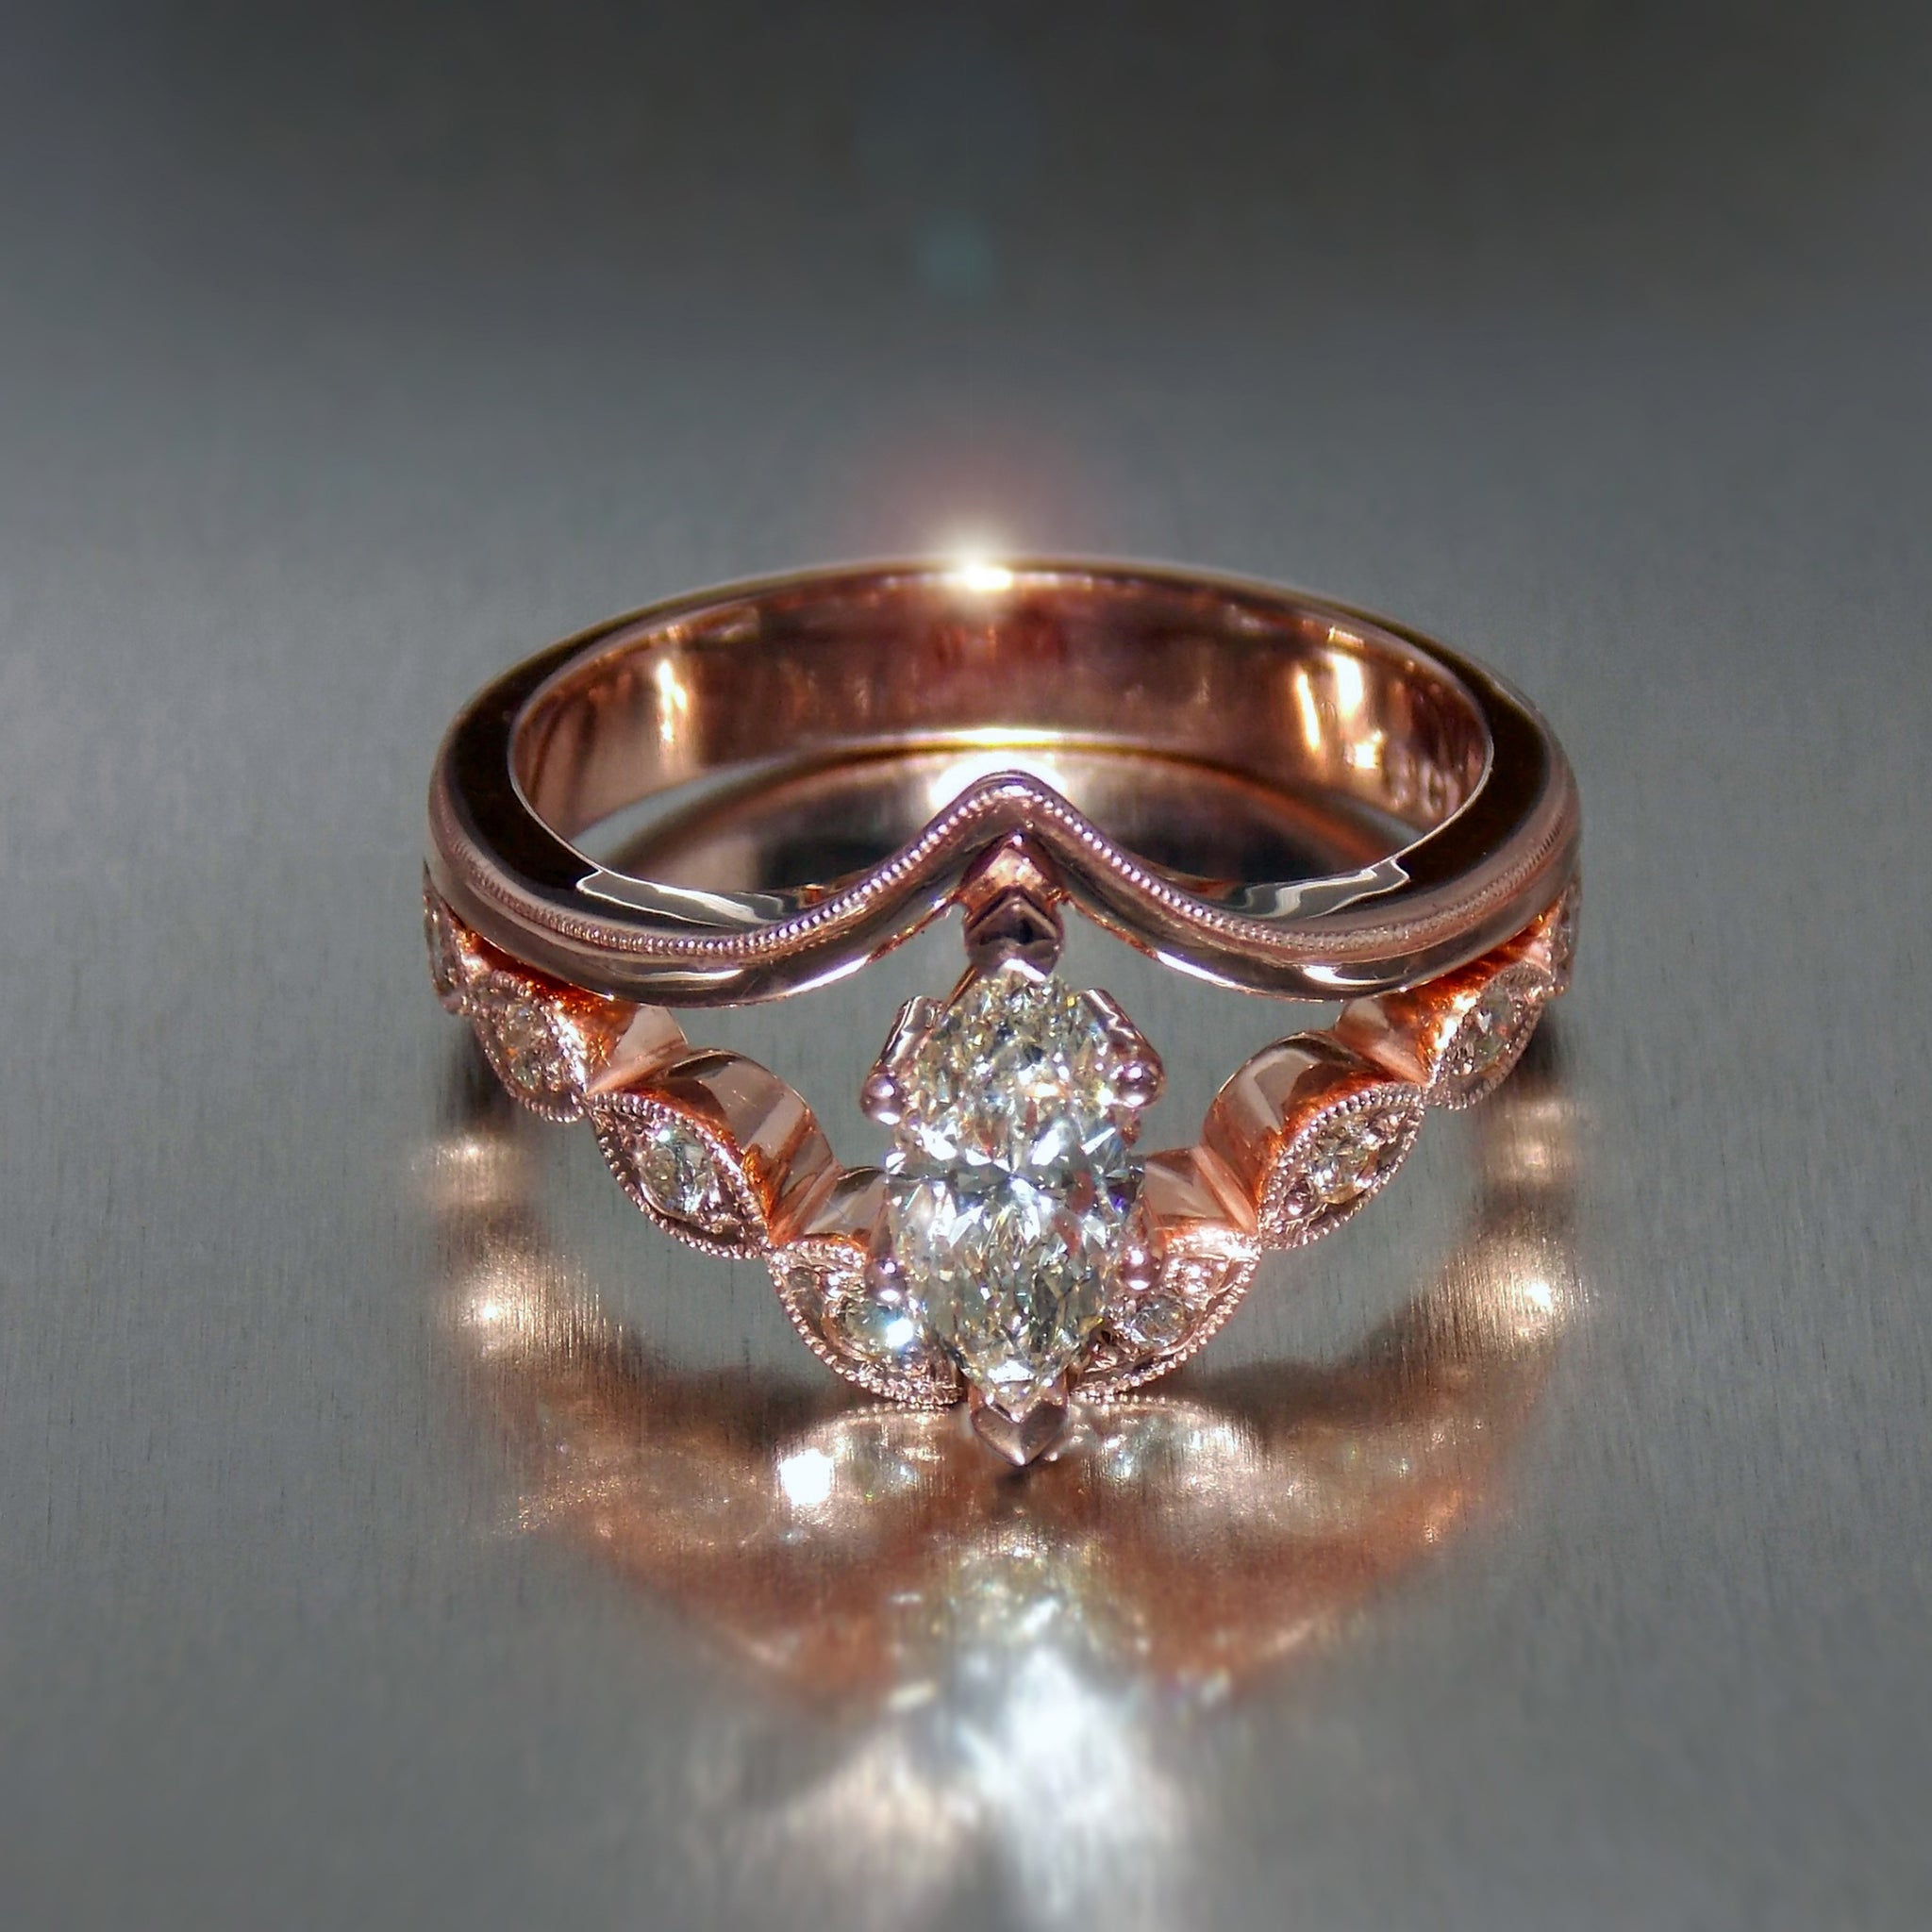 Marquise cut diamond engagement ring set in 9K rose gold